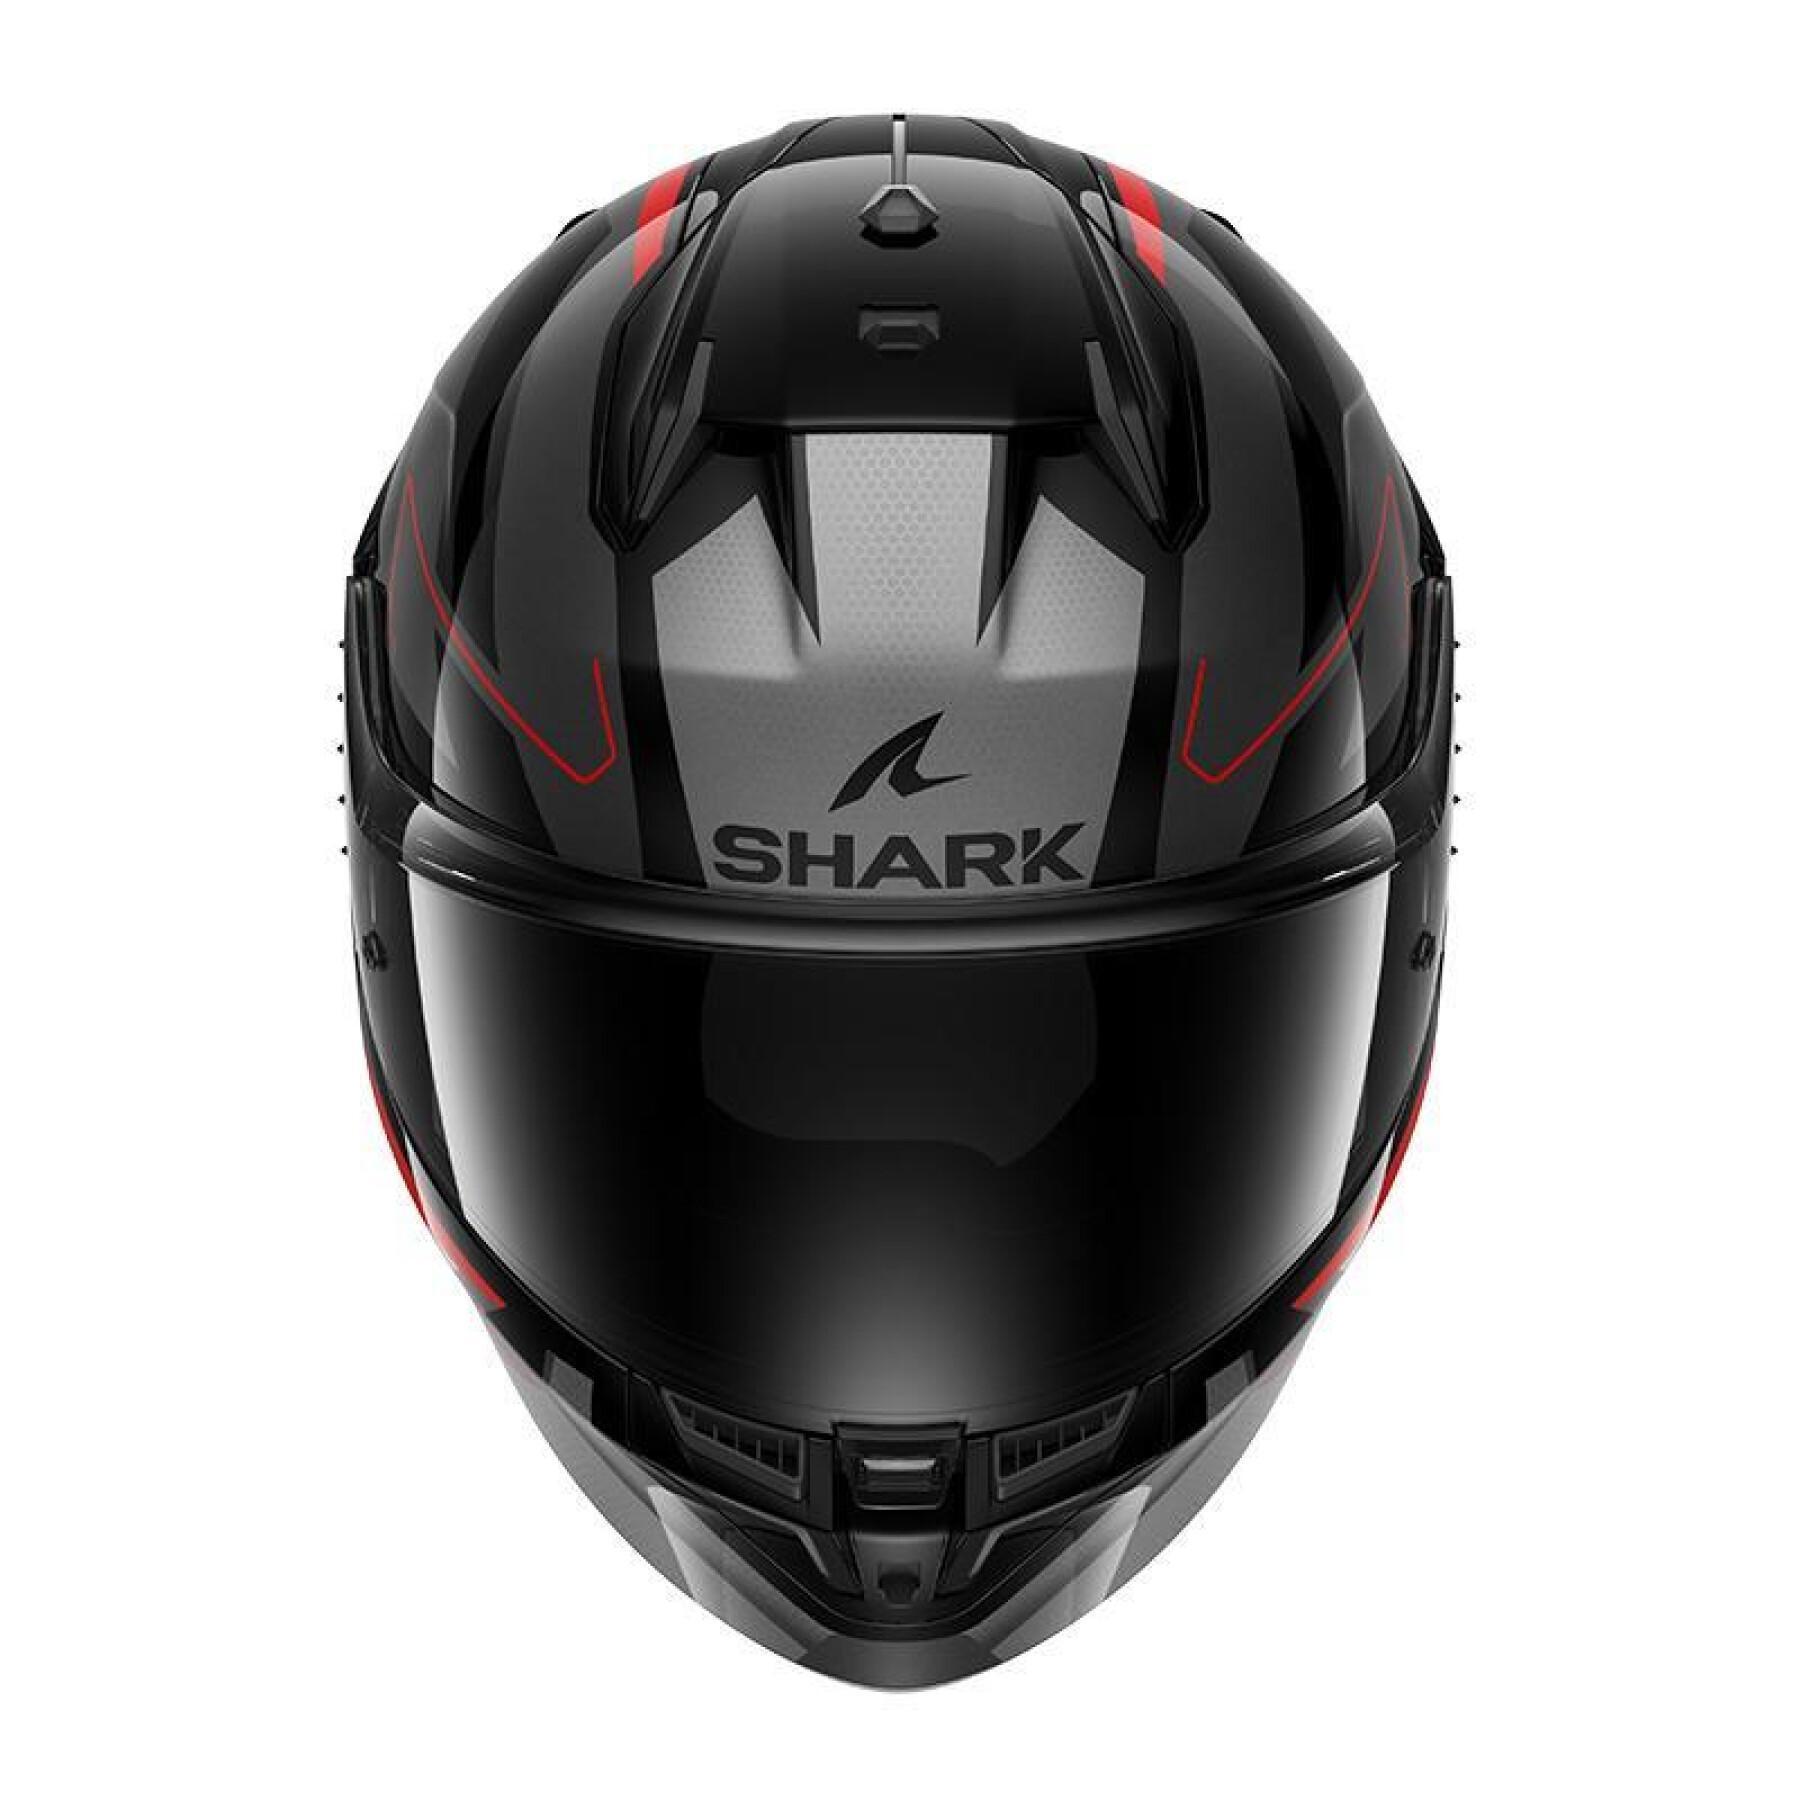 Capacete facial completo Shark D-Skwal 3 Sizler